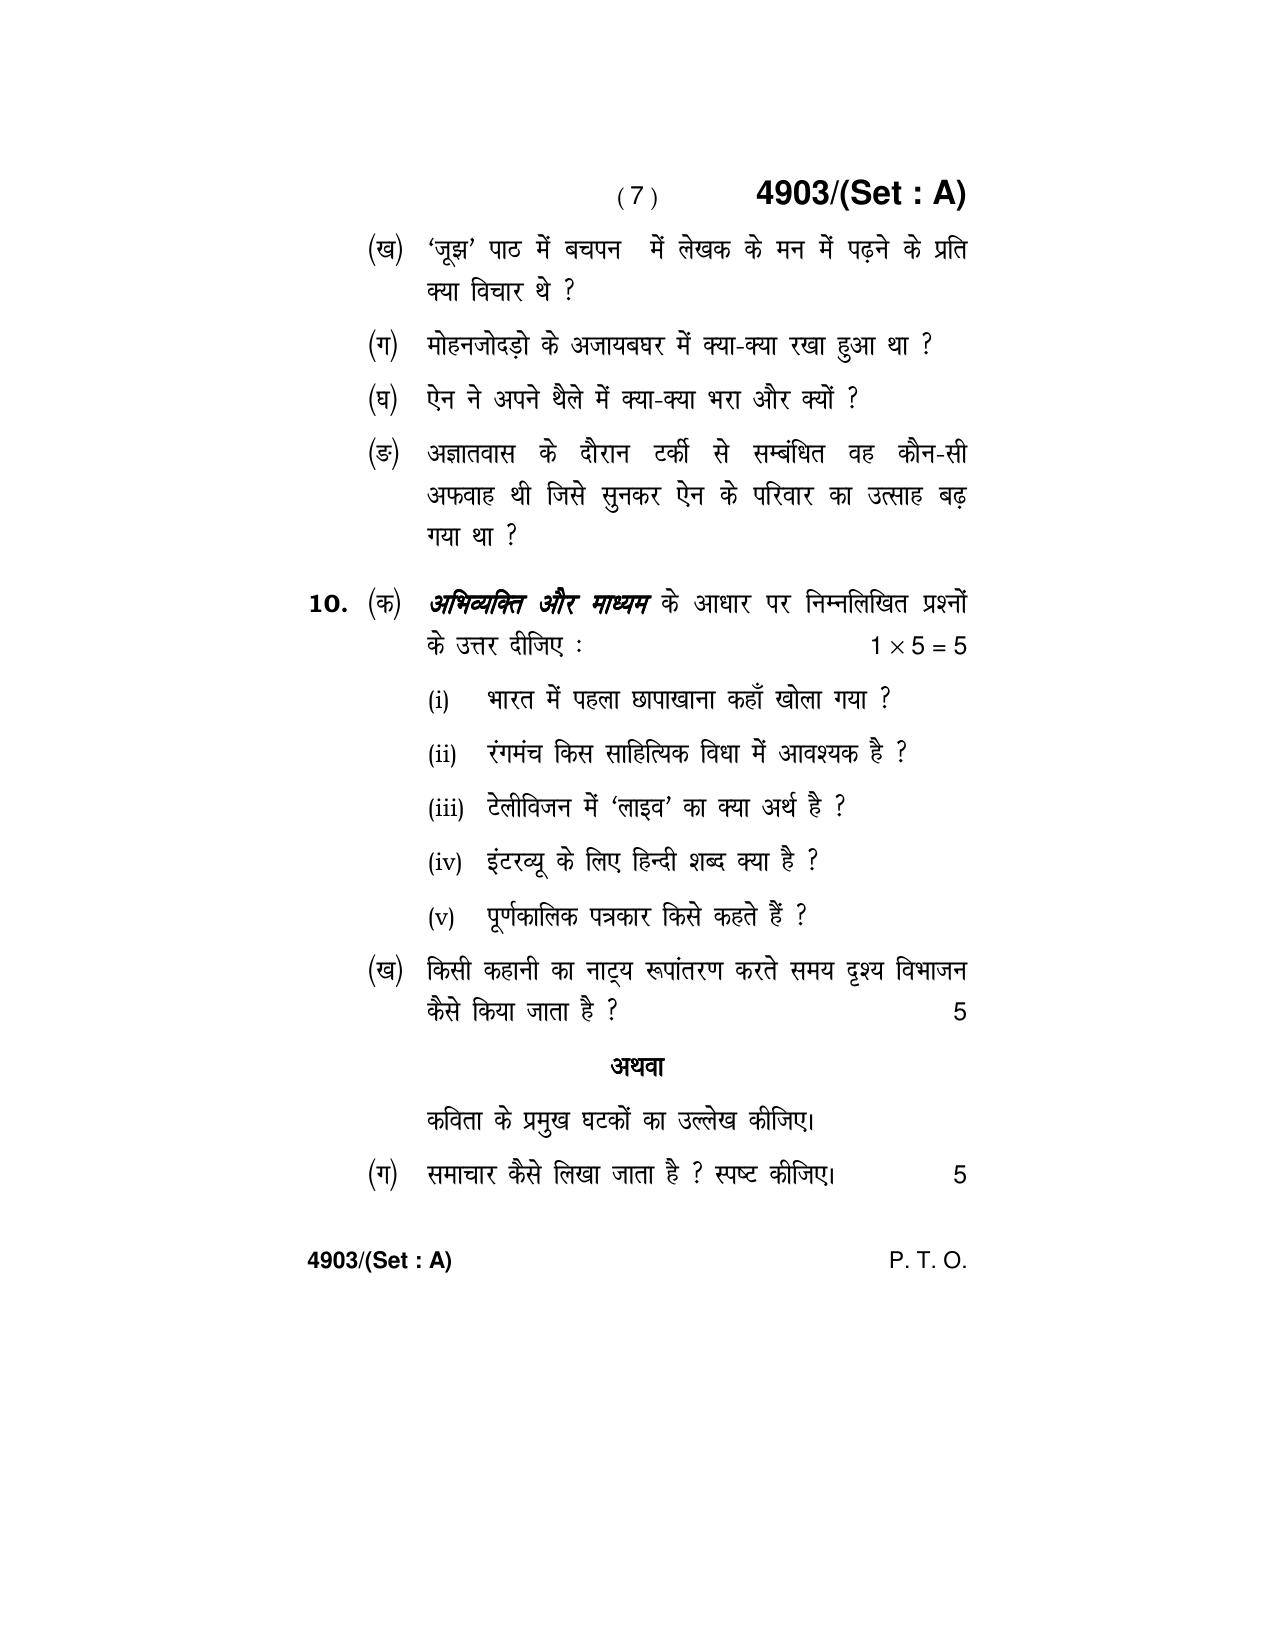 Haryana Board HBSE Class 12 Hindi Core 2020 Question Paper - Page 7